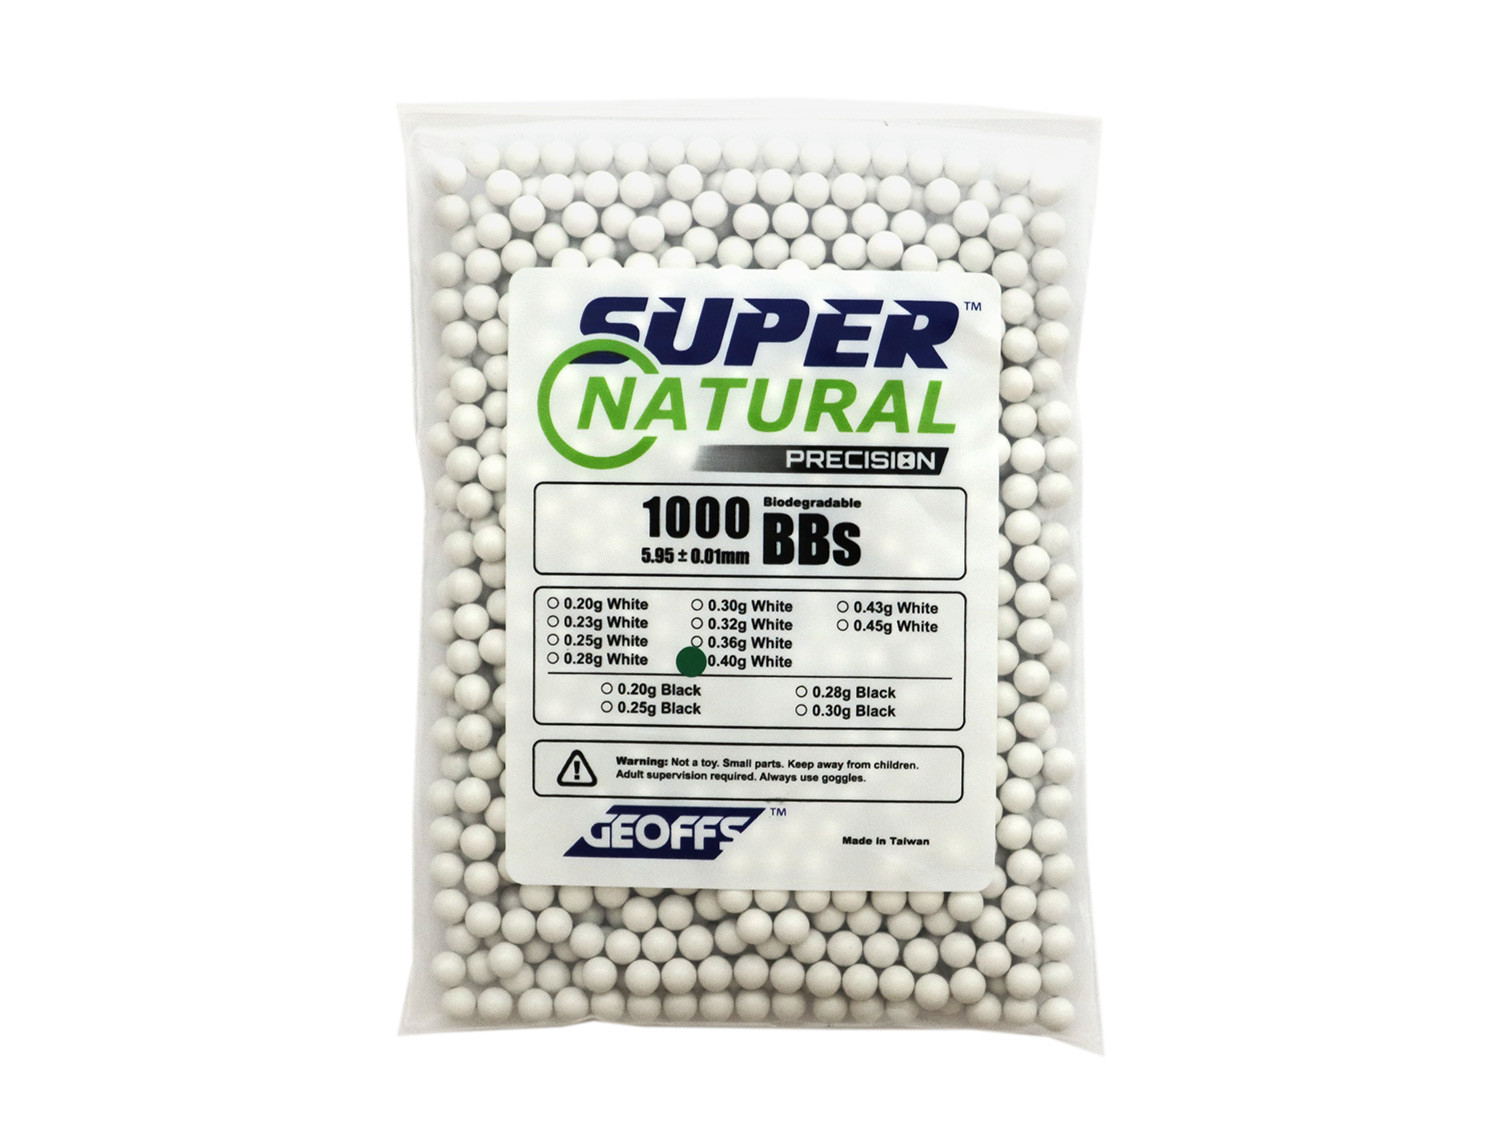 Details about   New 0.28G 6mm Glass Marbles BBs 1000 ROUNDS/BAG Pellet